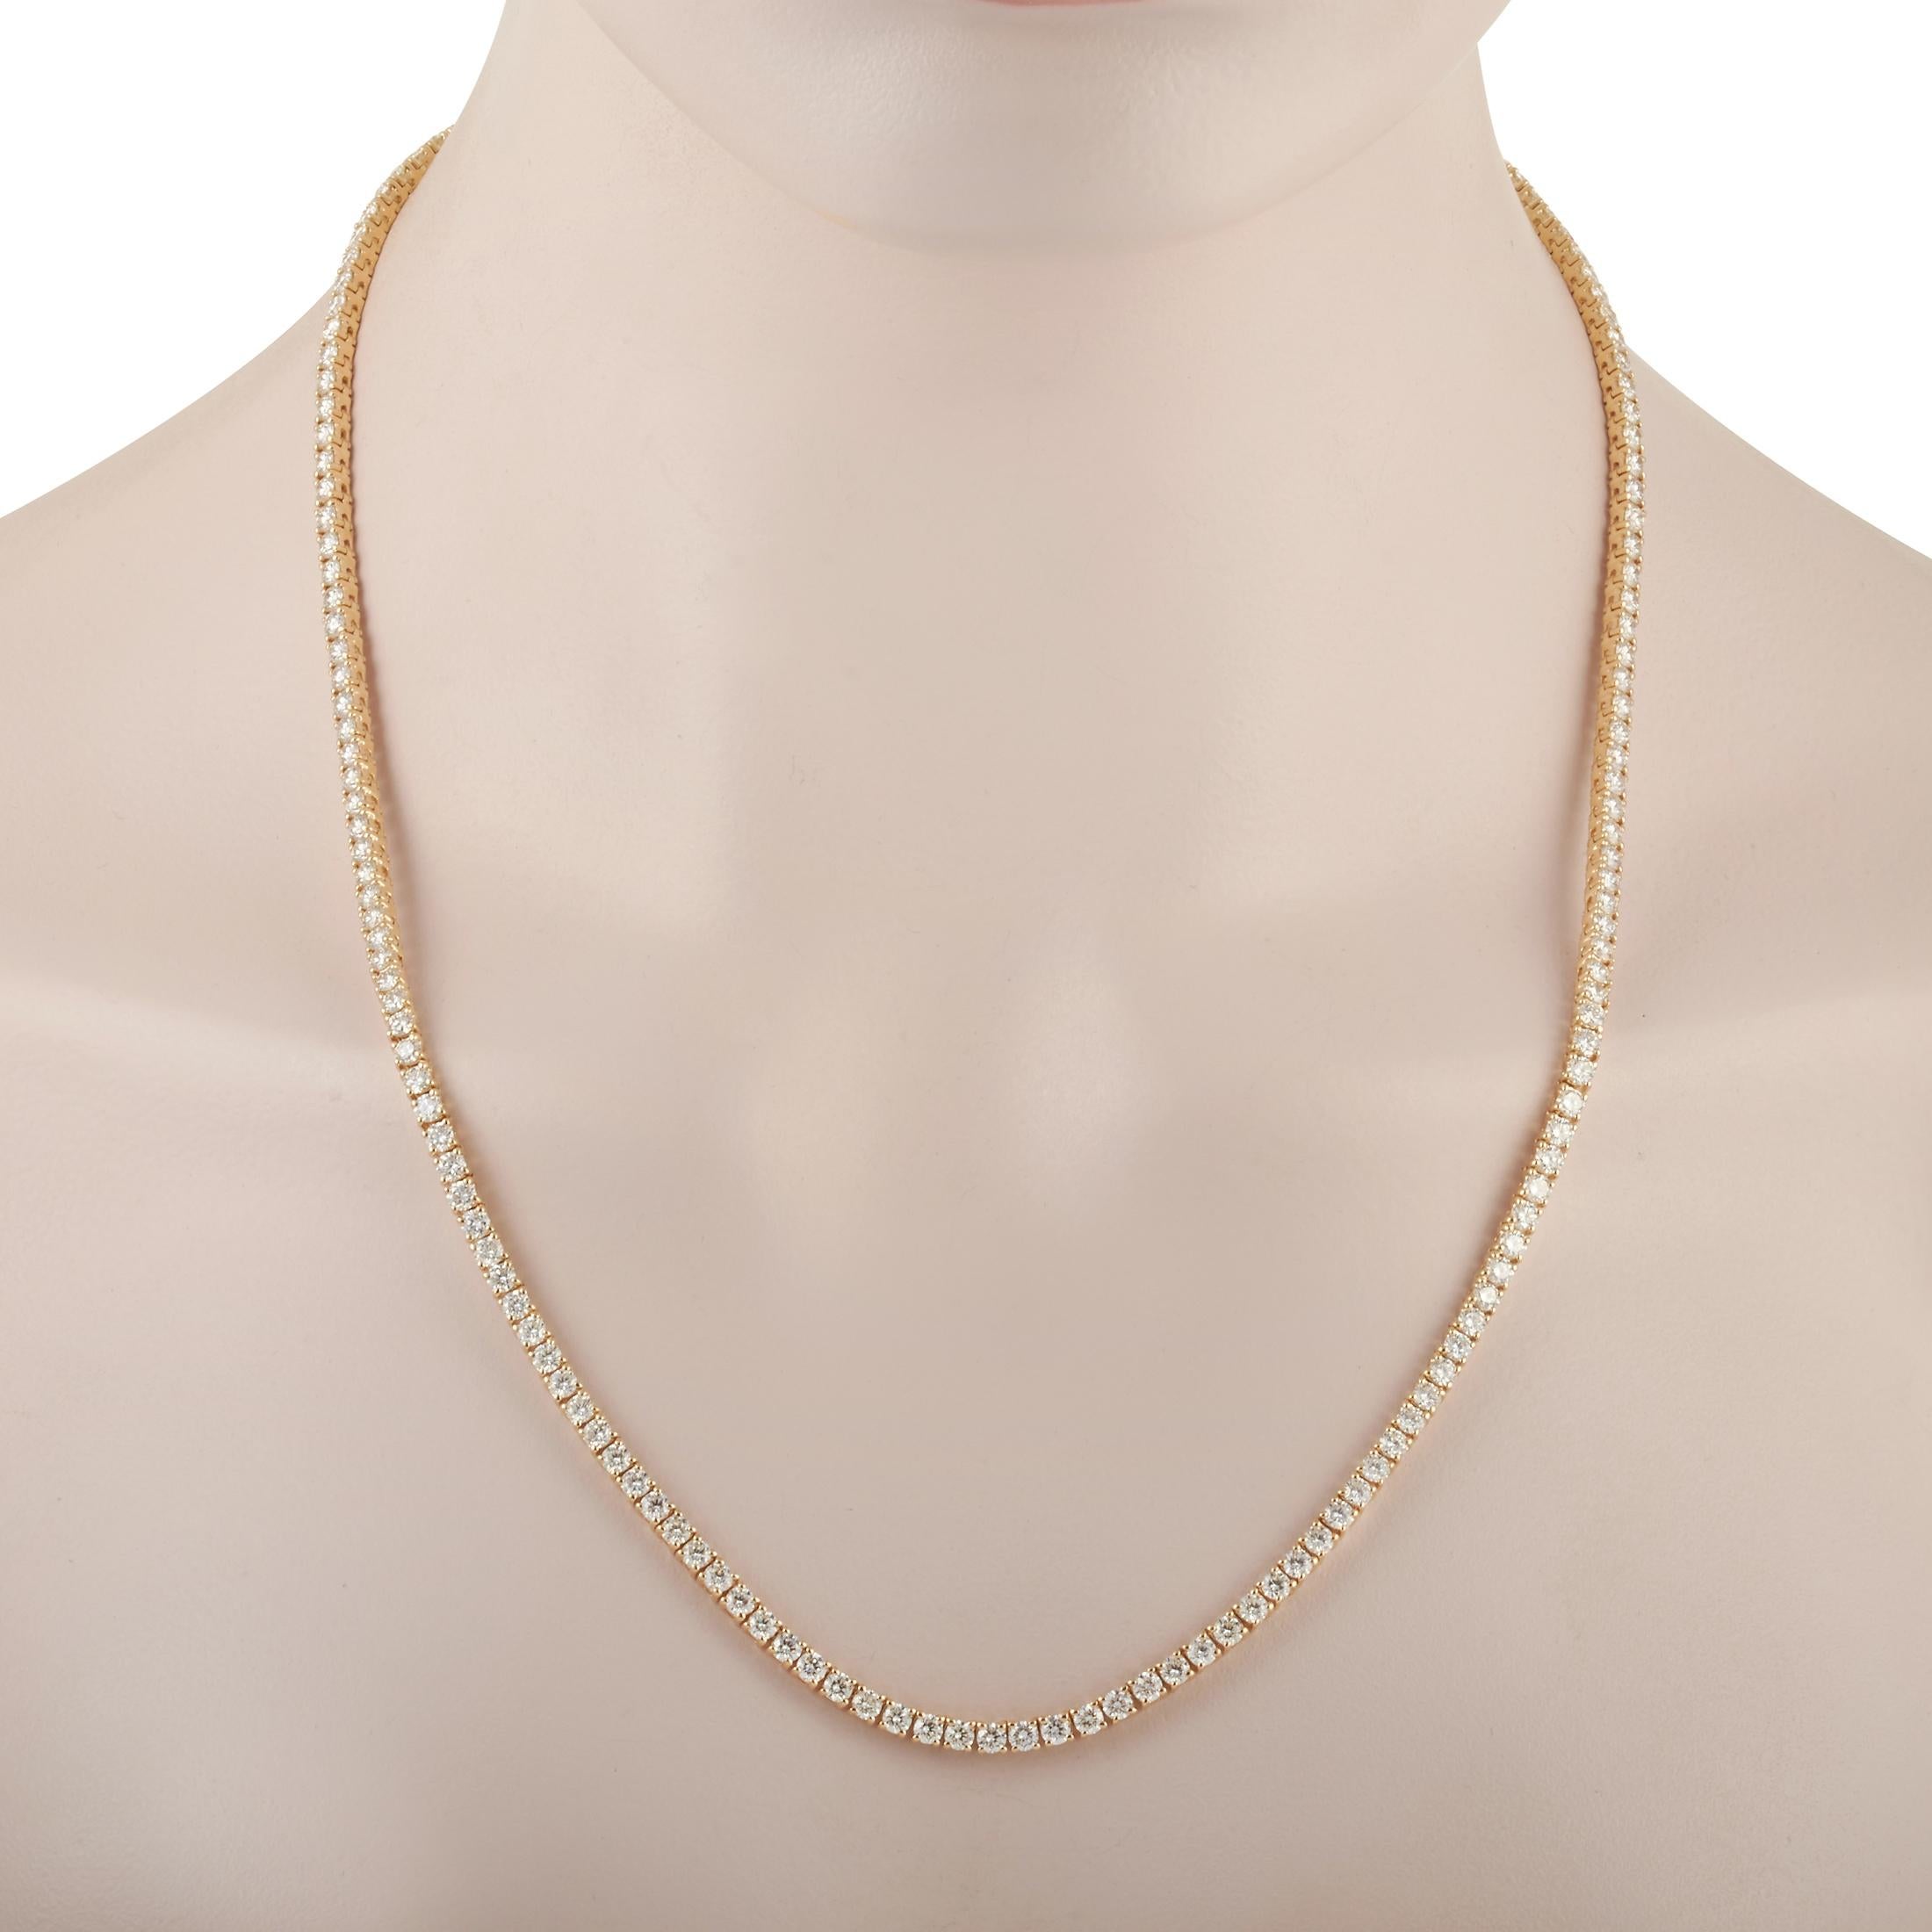 This alluring 18K yellow gold necklace is set with multiple diamond stones of 15.69 carats. The stunning necklace weighs 35.3 grams and boasts a length of 22 inches.

This jewelry piece is offered in new condition and includes a gift box.